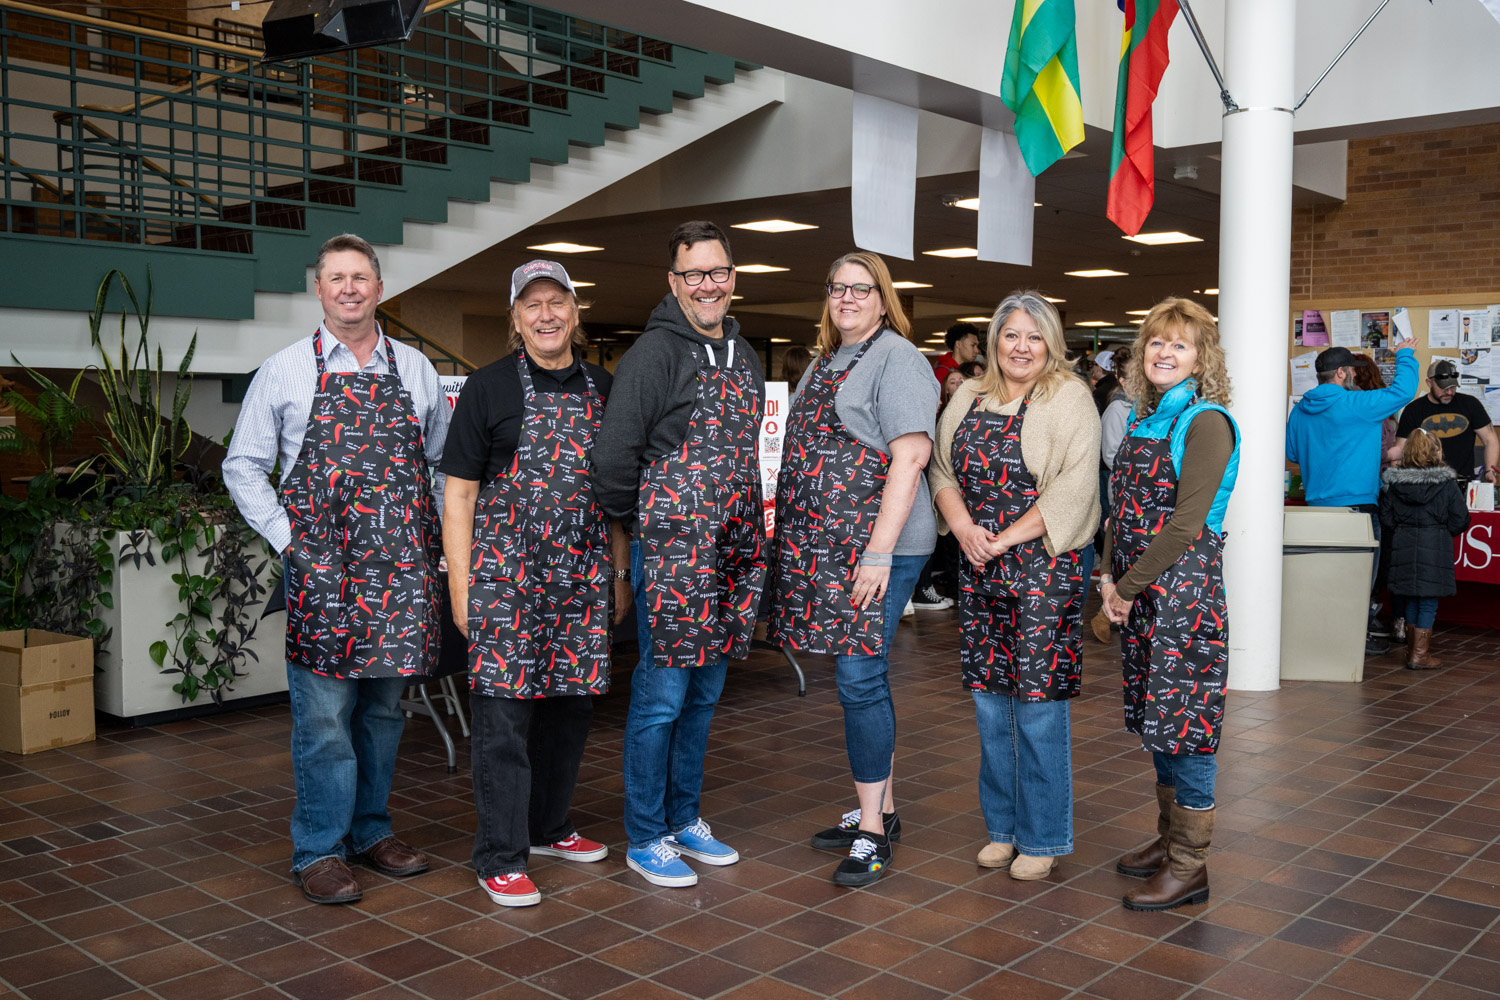 Group Photo of all Chili Judges 